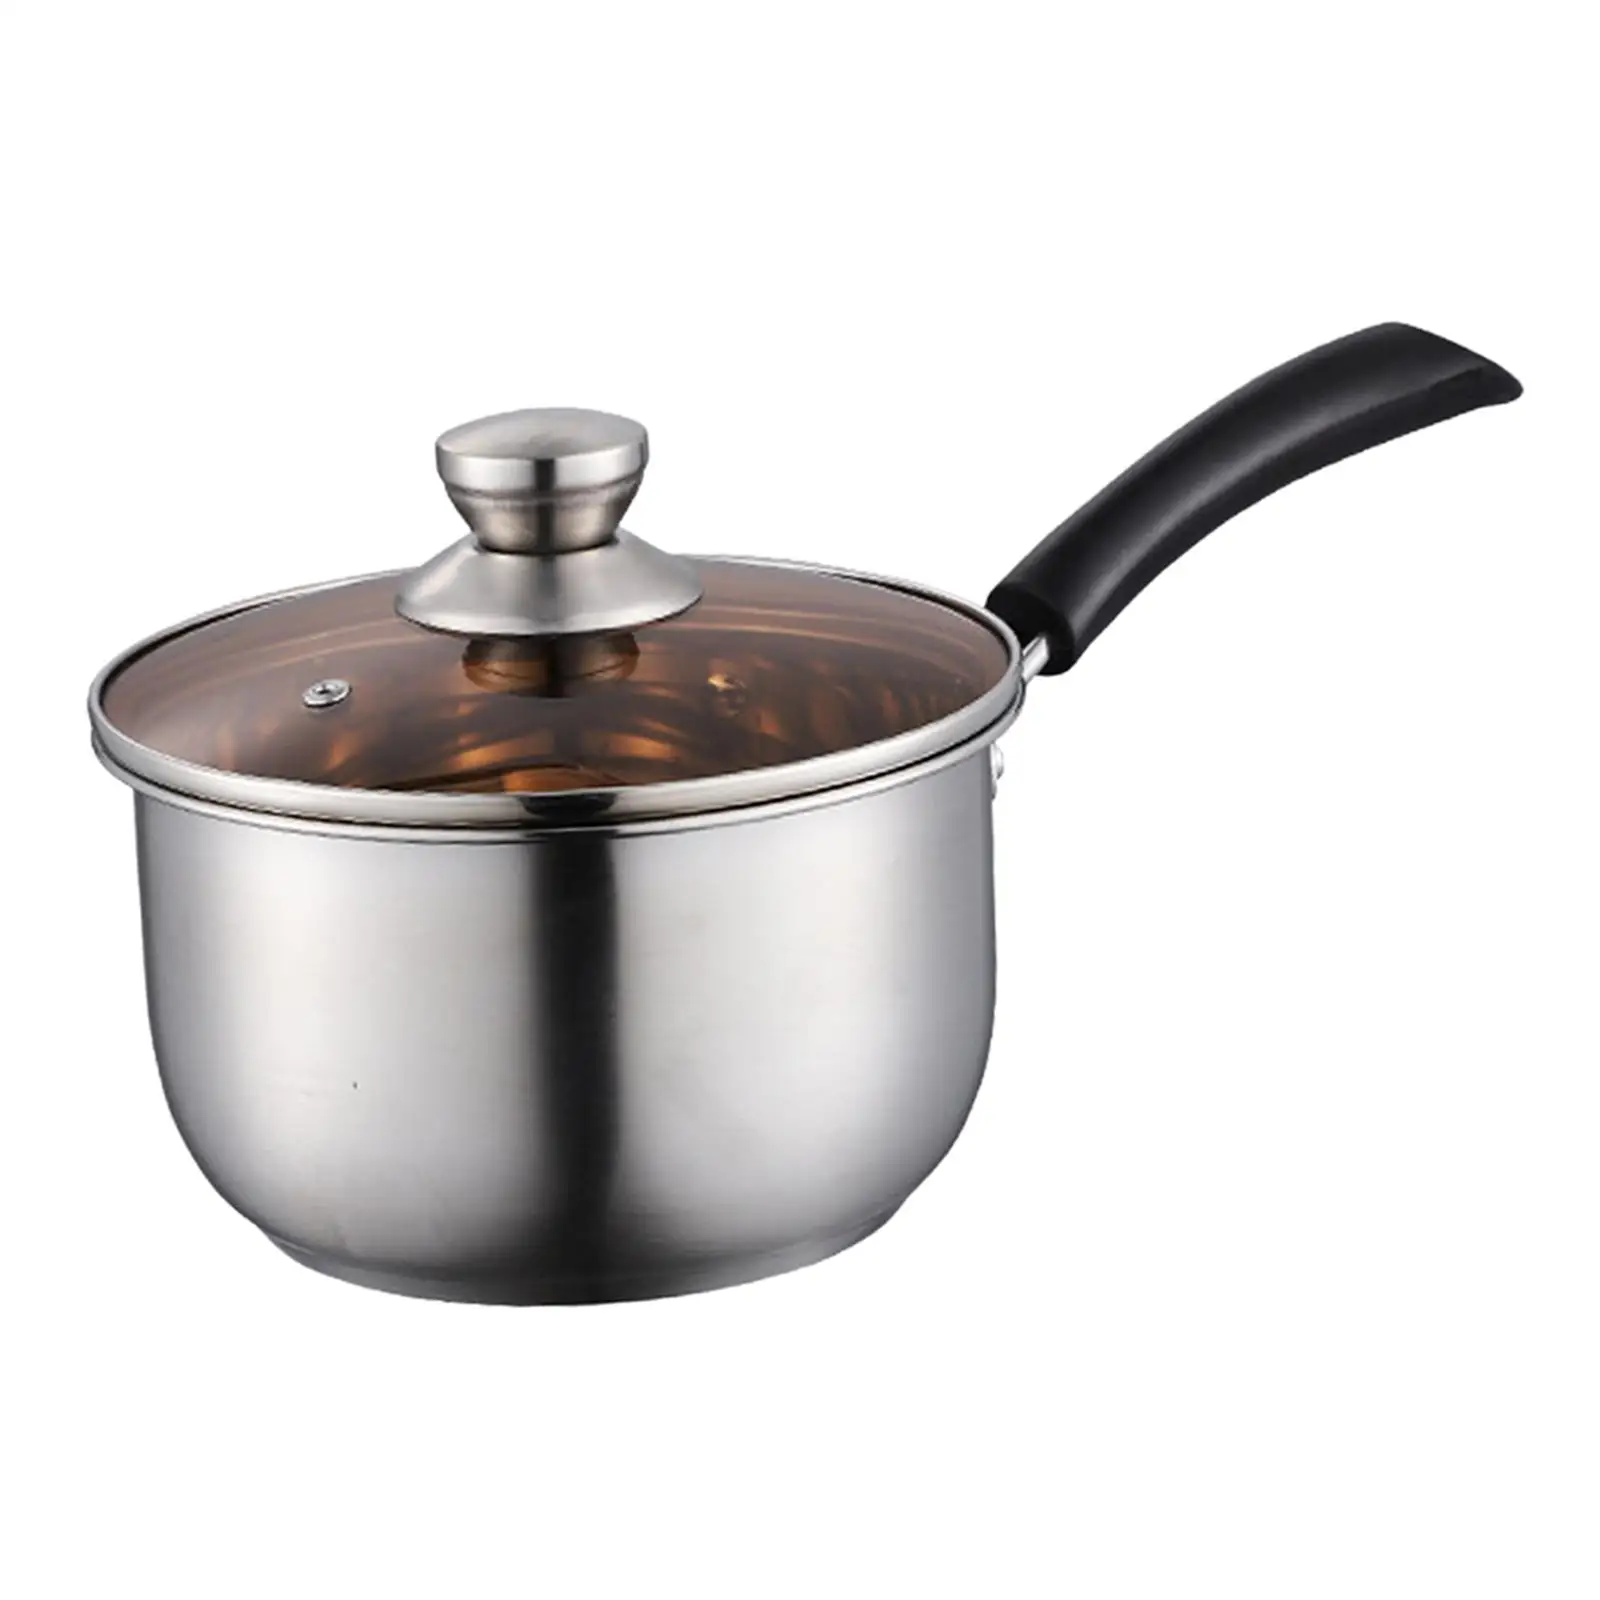 Small Saucepan Long Handle Cooking Pot with Lid Utensils for Dining Room Home Restaurant